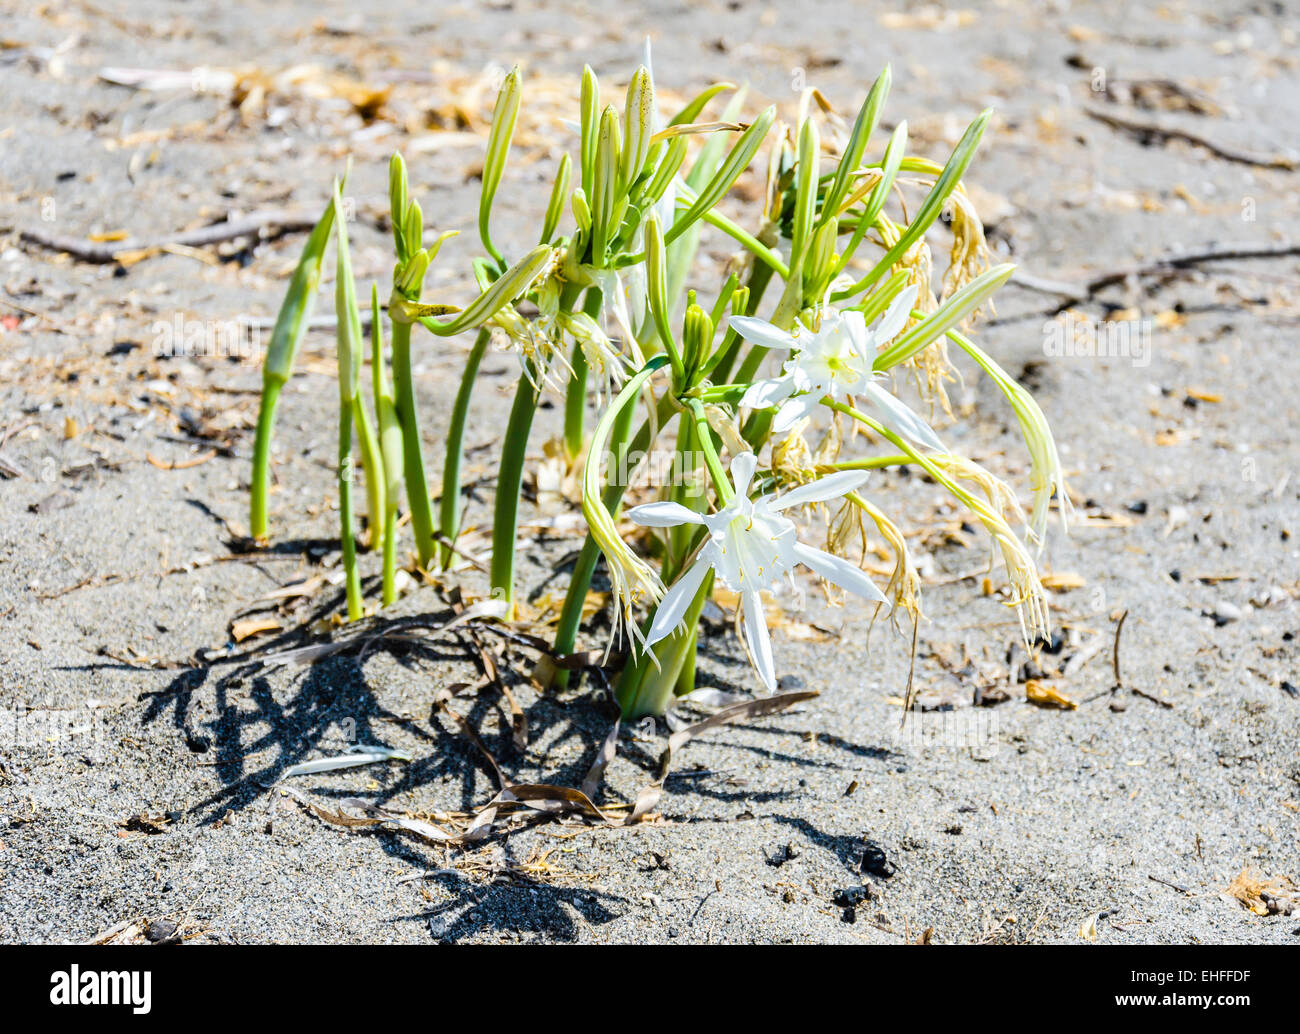 Pancratium maritimum or sea daffodil is a species of bulbous plant native to both sides of the Mediterranean region.  Image has Stock Photo